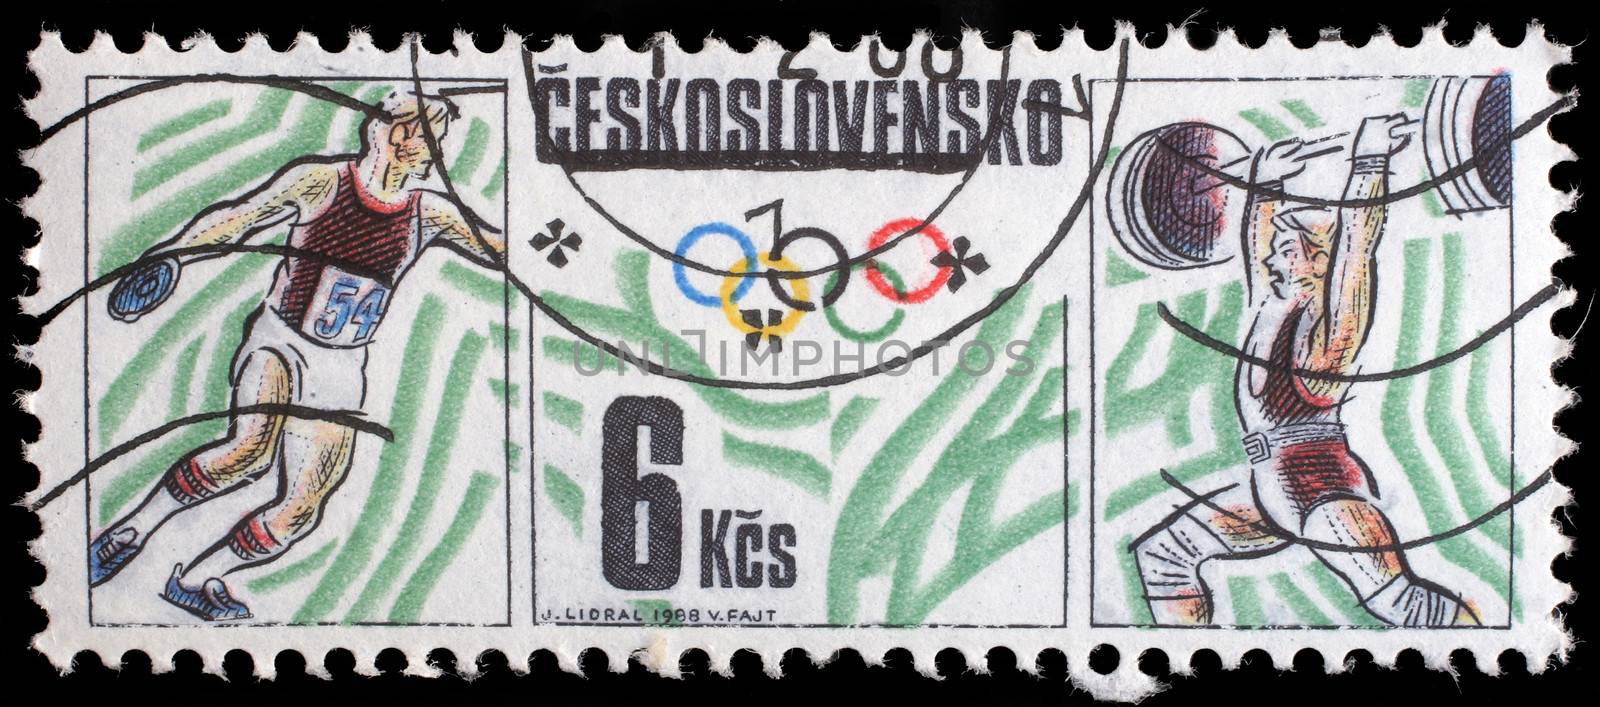 Stamp printed by Czechoslovakia, shows Olympics, table tennis and weightlifting by atlas